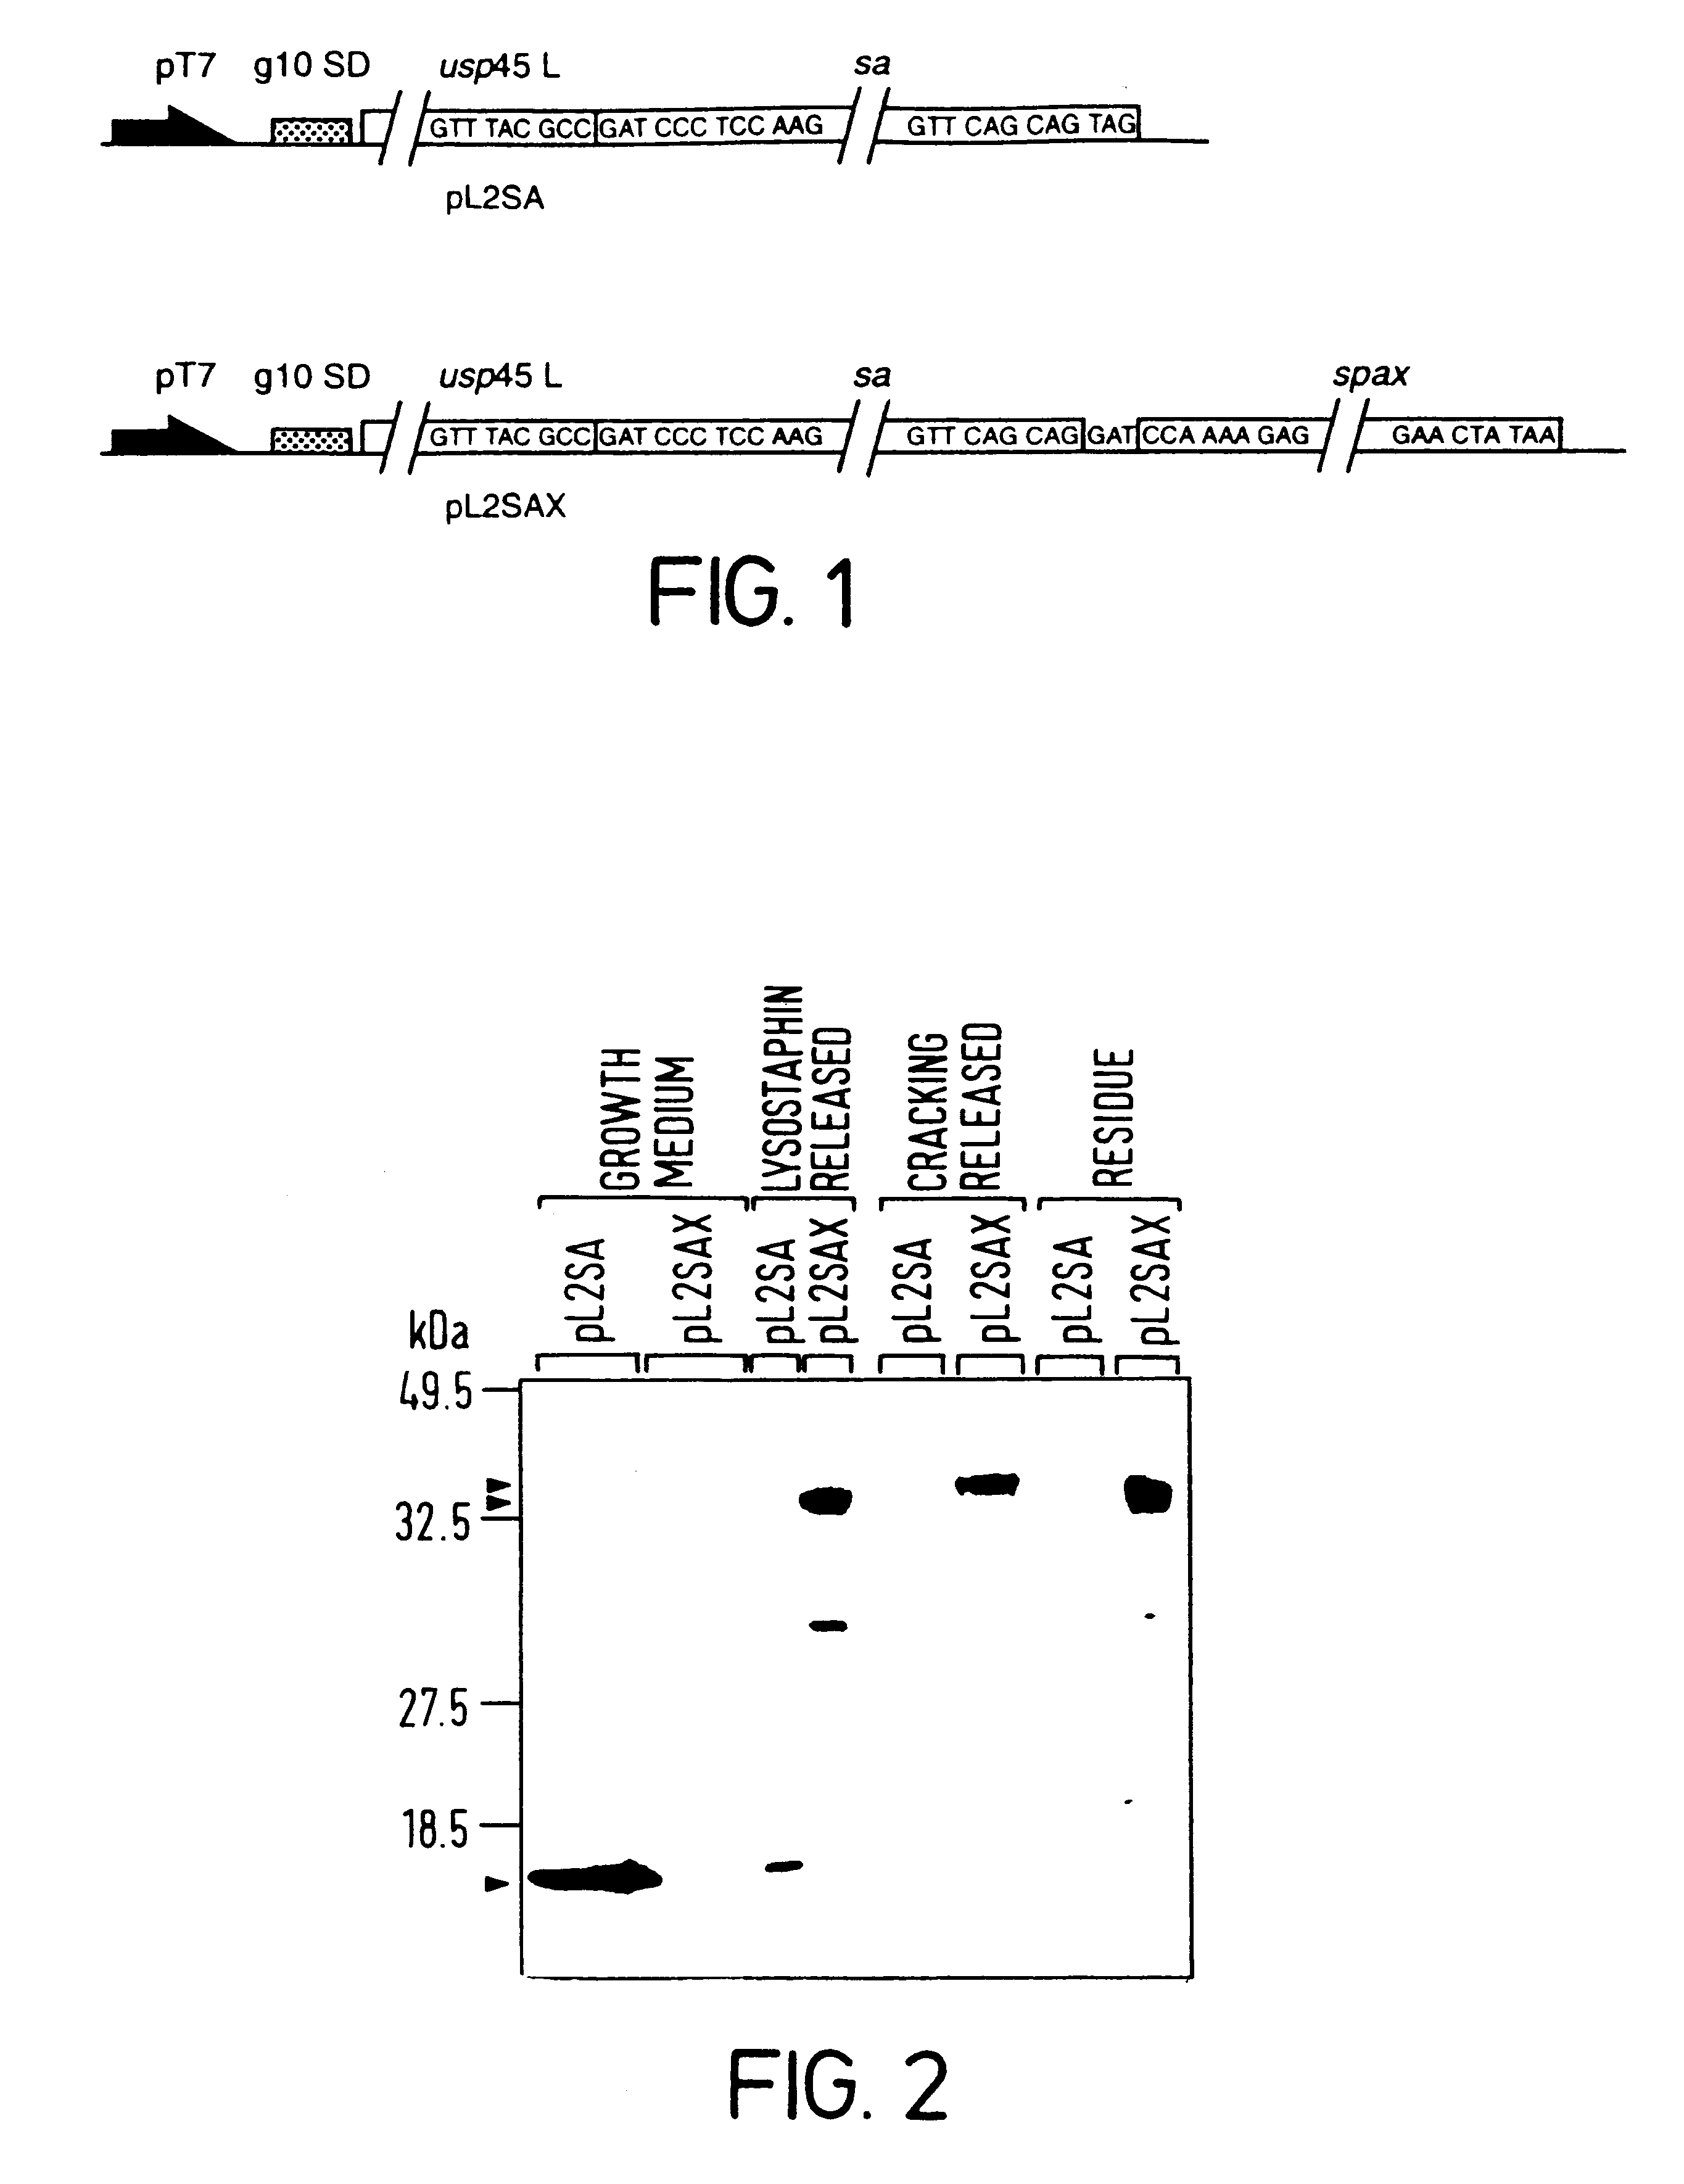 Materials and methods relating to the attachment and display of substances on cell surfaces